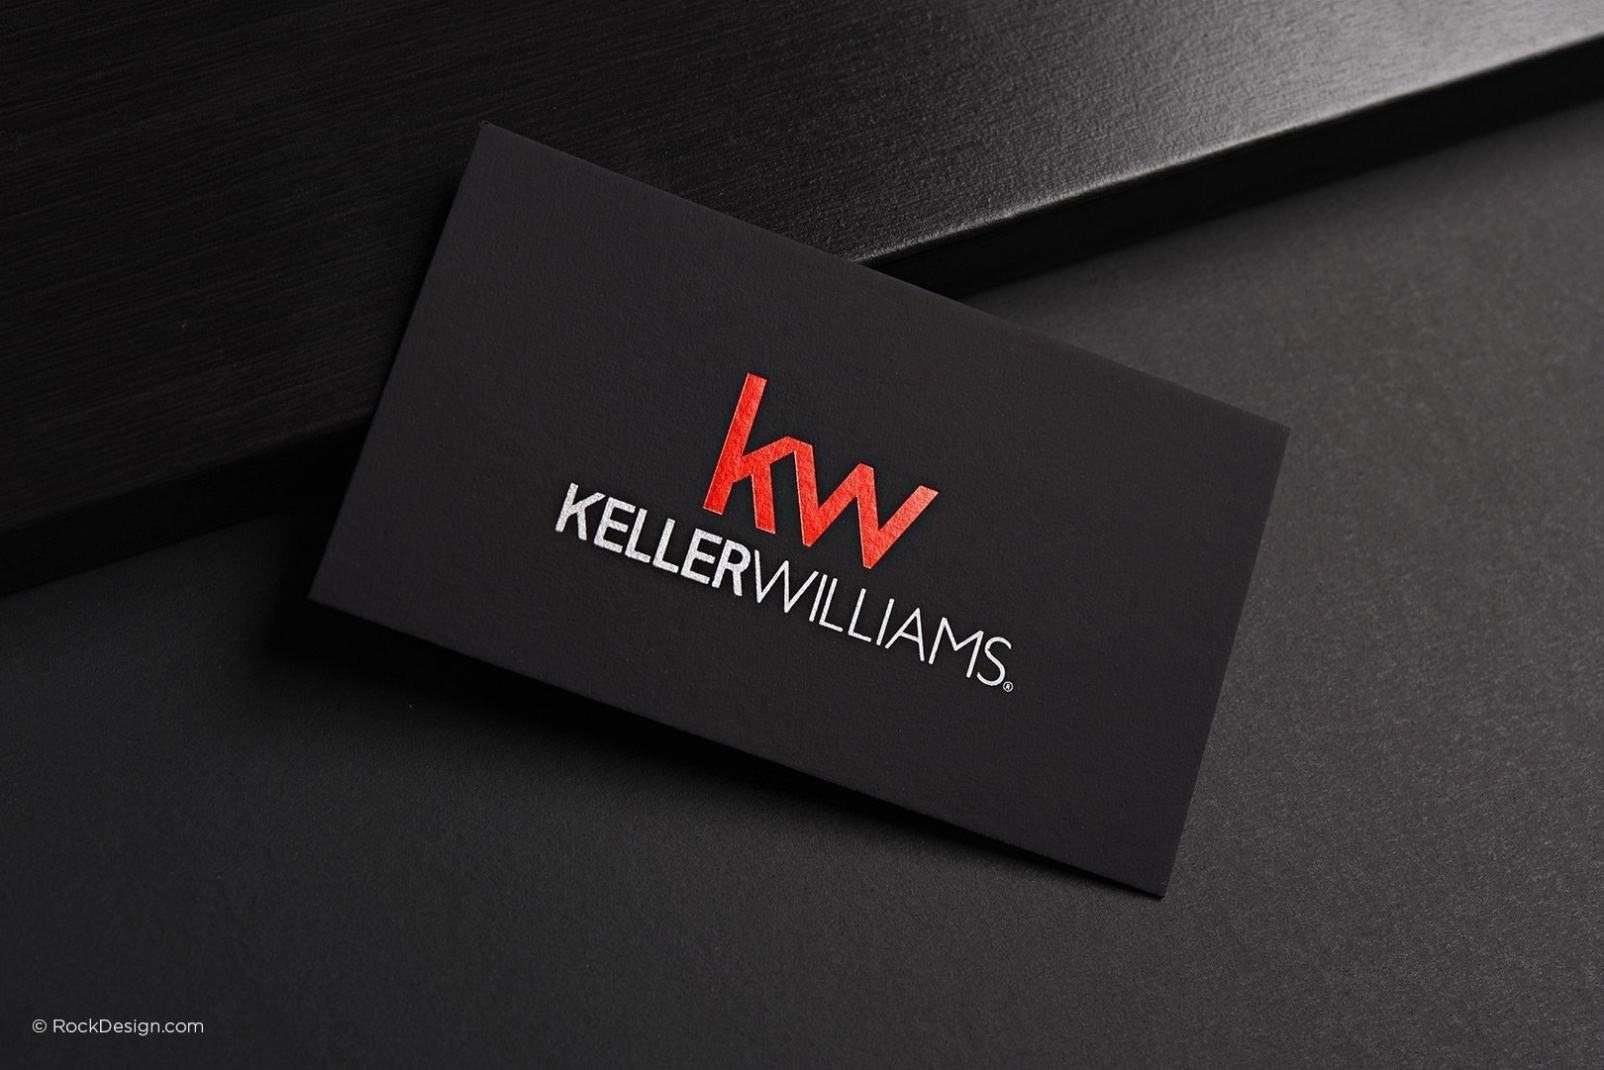 Free Keller Williams Business Card Template With Print Service | Rockdesign intended for Keller Williams Business Card Templates